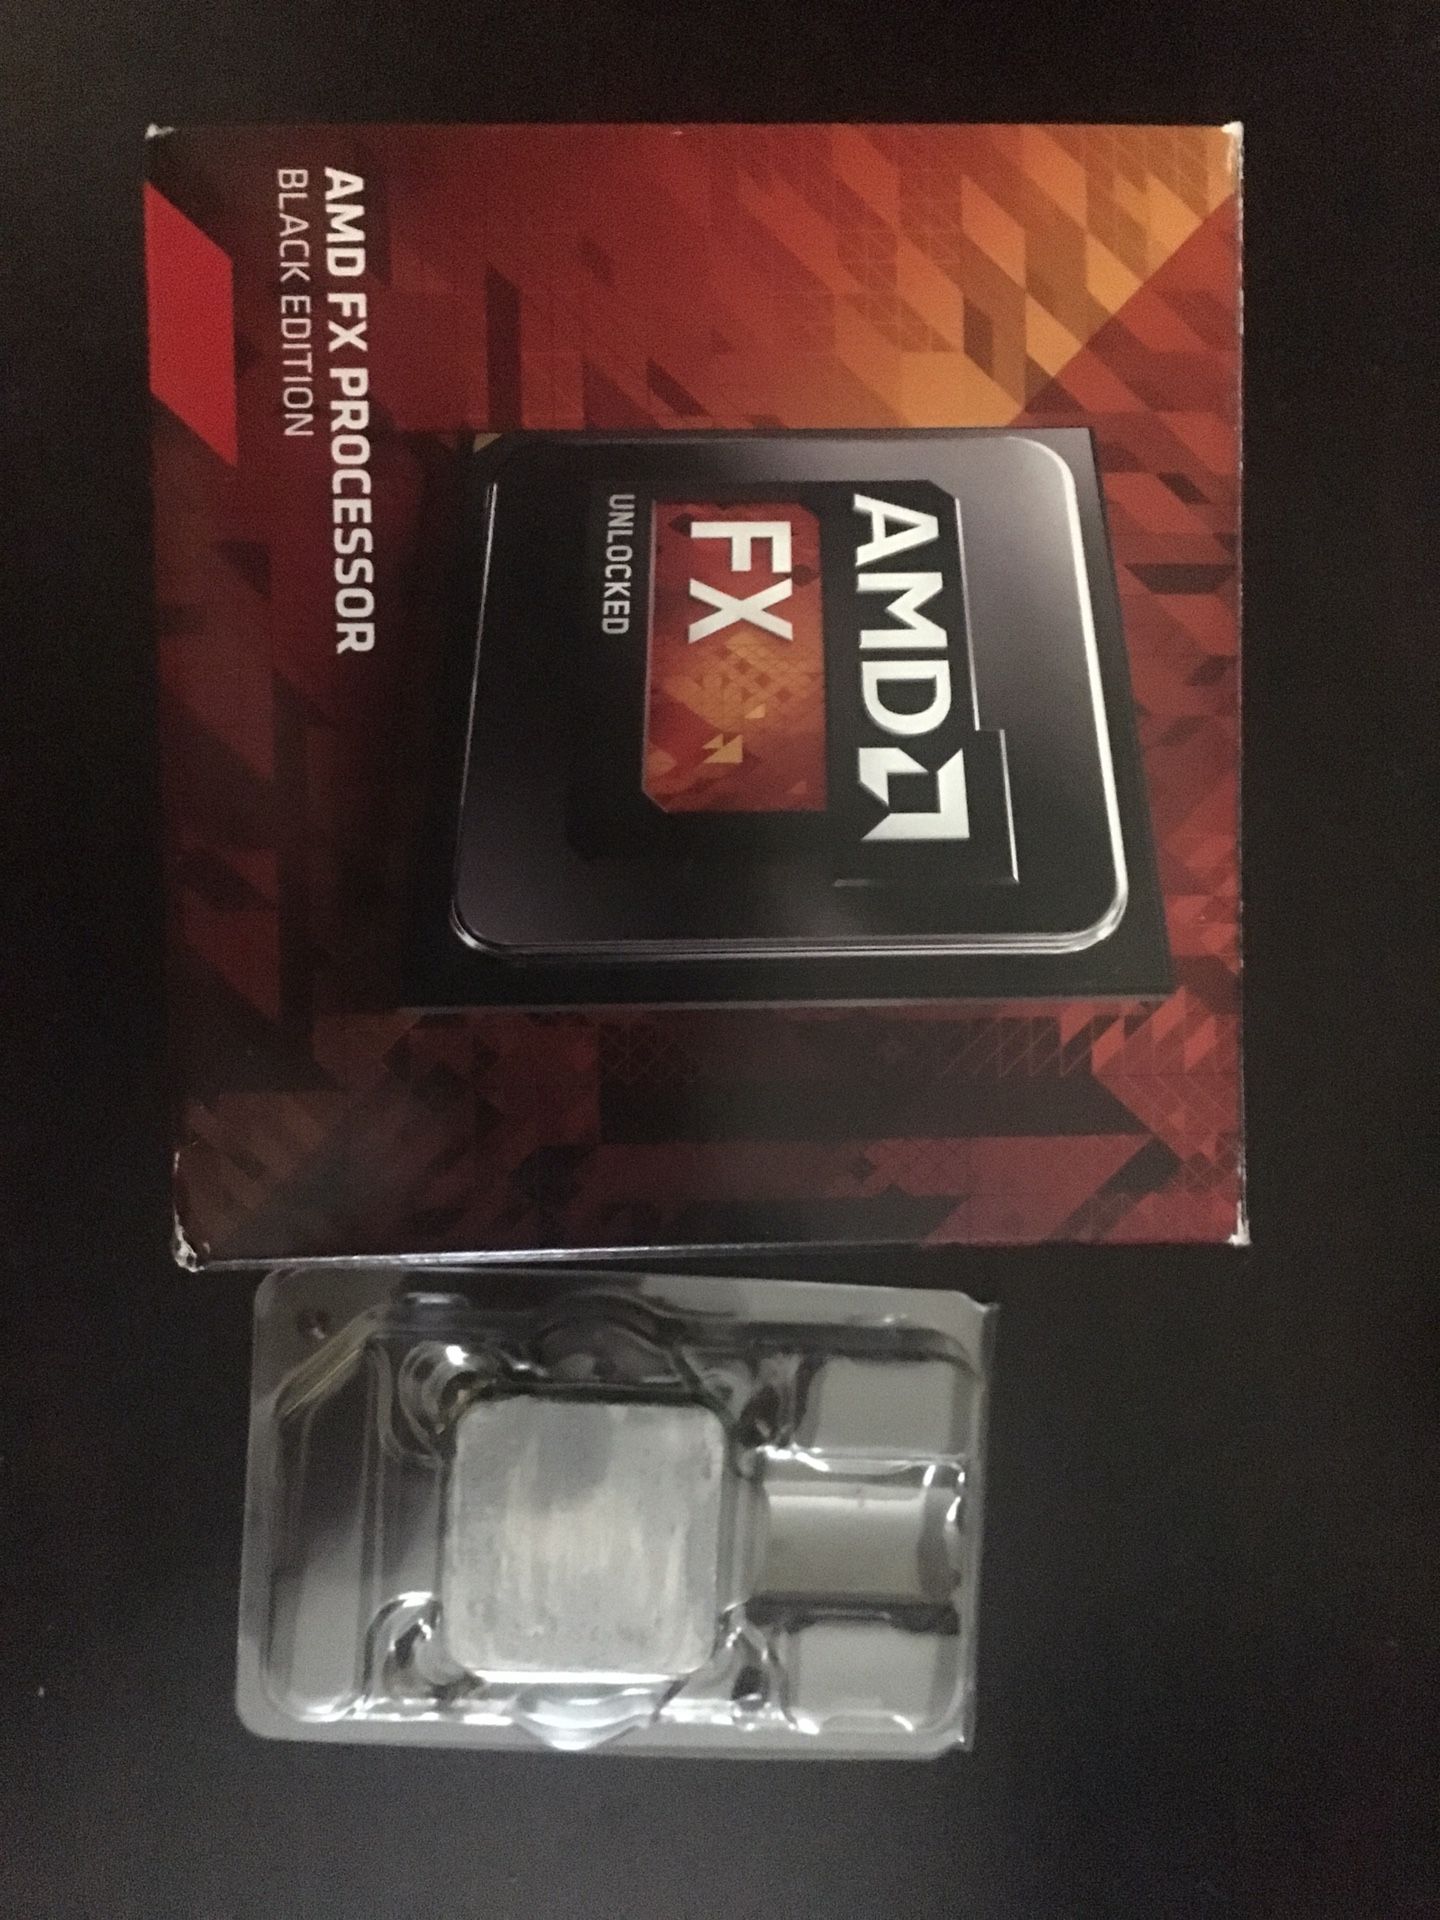 AMD FX 8350 - 8 Core CPU up to 5.0 Ghz